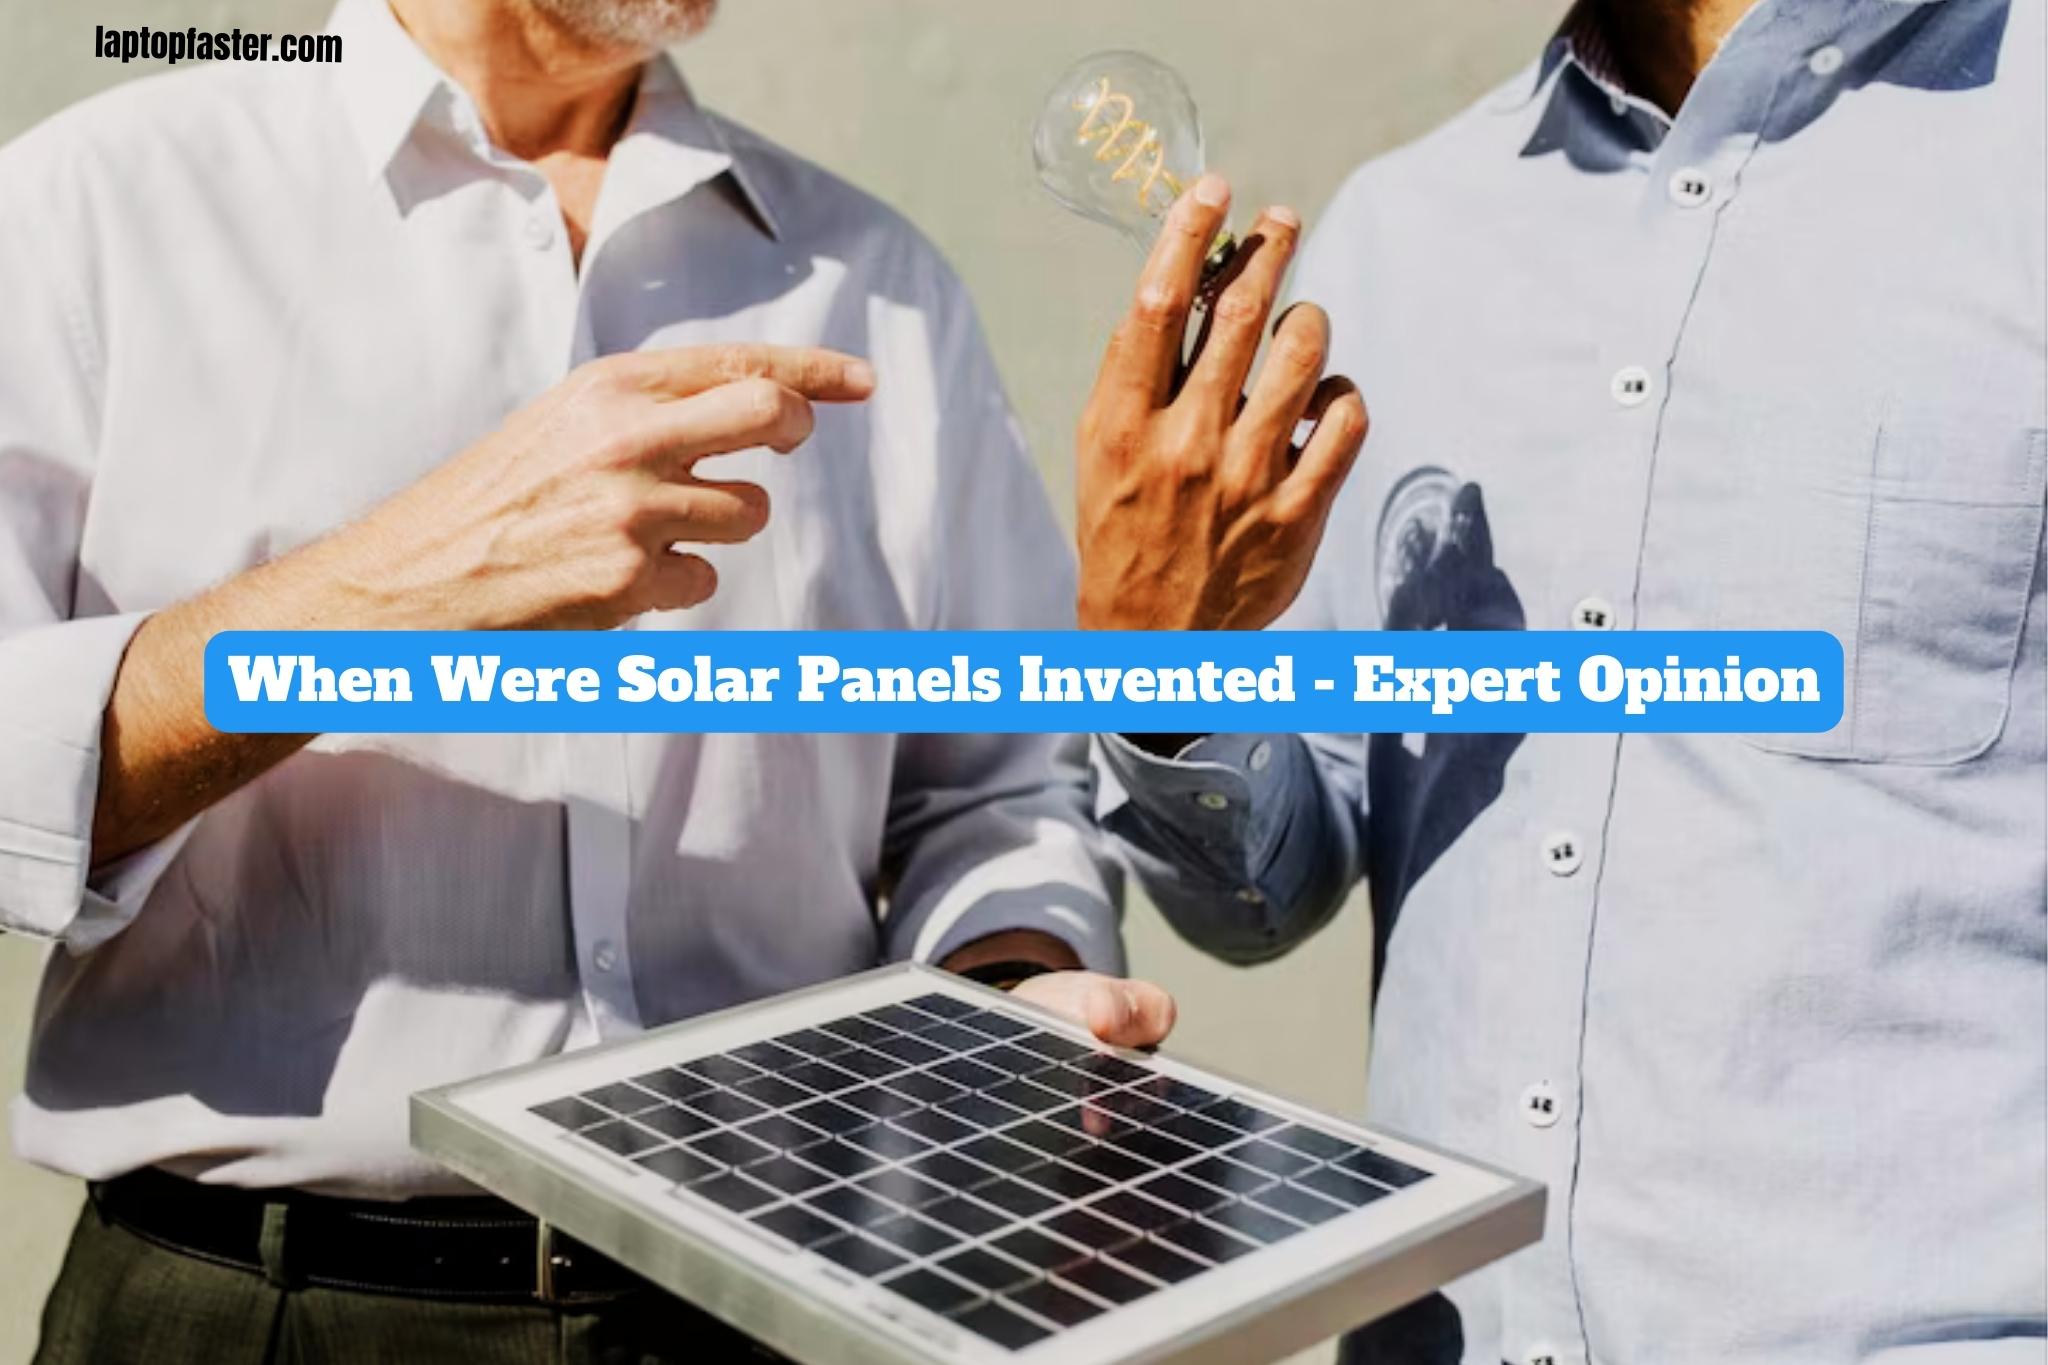 When Were Solar Panels Invented